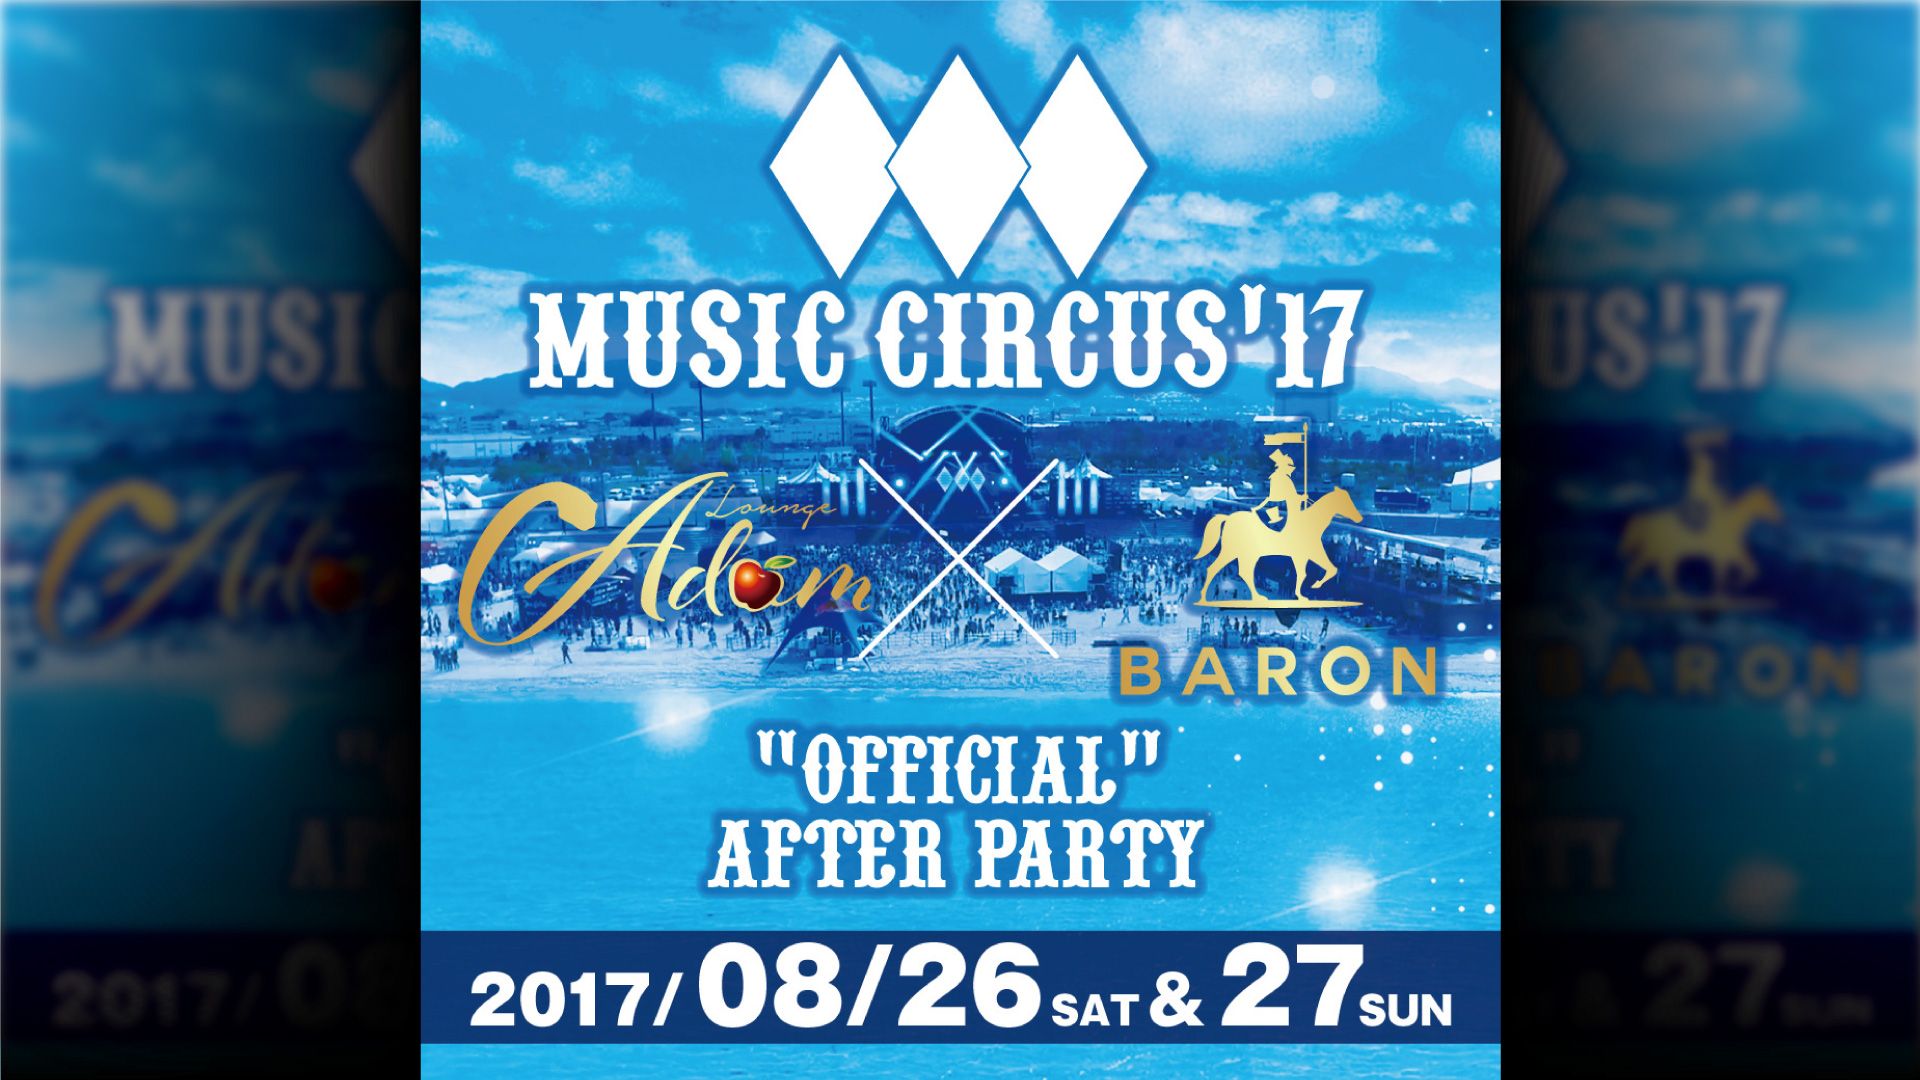 BANQUEST - 宴 - / MUSIC CIRCUS'17 ADAM × BARON "OFFICIAL AFTER PARTY"